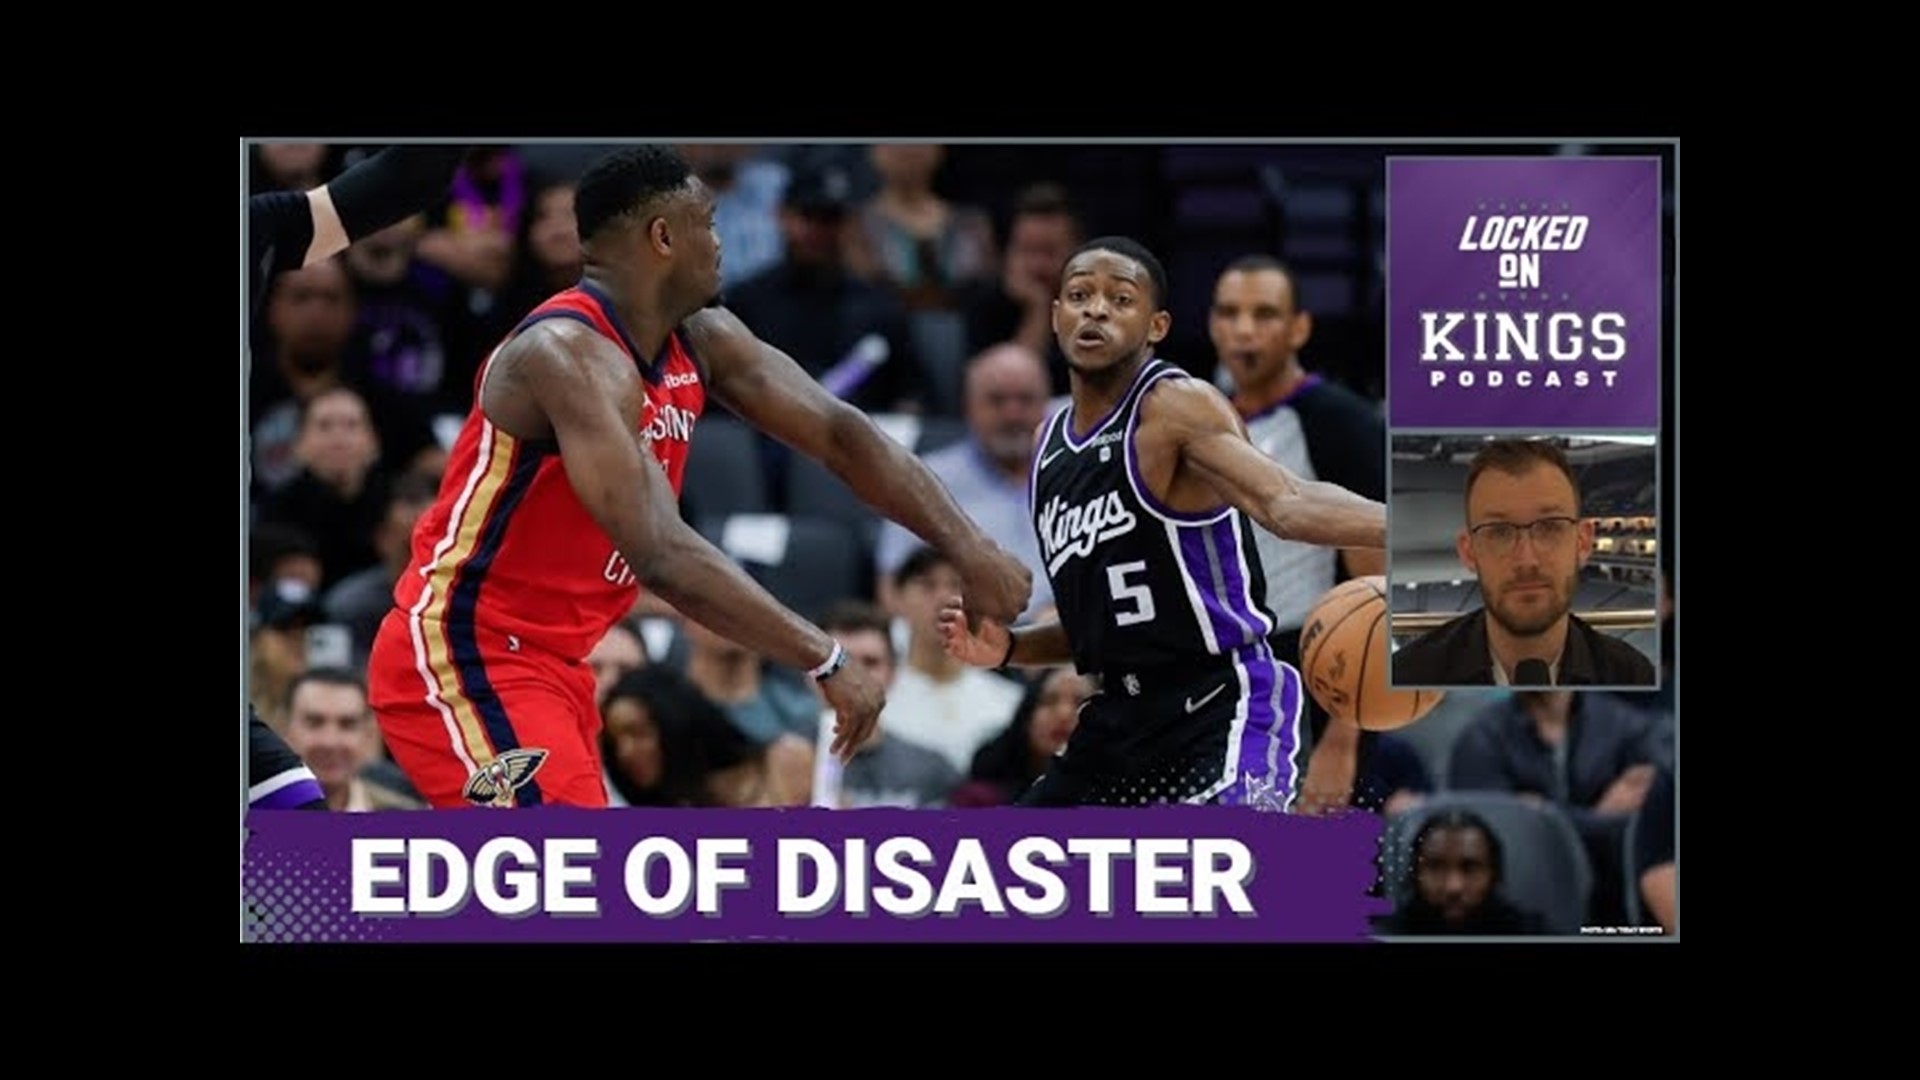 Matt George reacts to the Sacramento Kings loss to the New Orleans Pelicans, putting them in a three-way tie with the Warriors & Lakers for the 8 through 10 seeds.